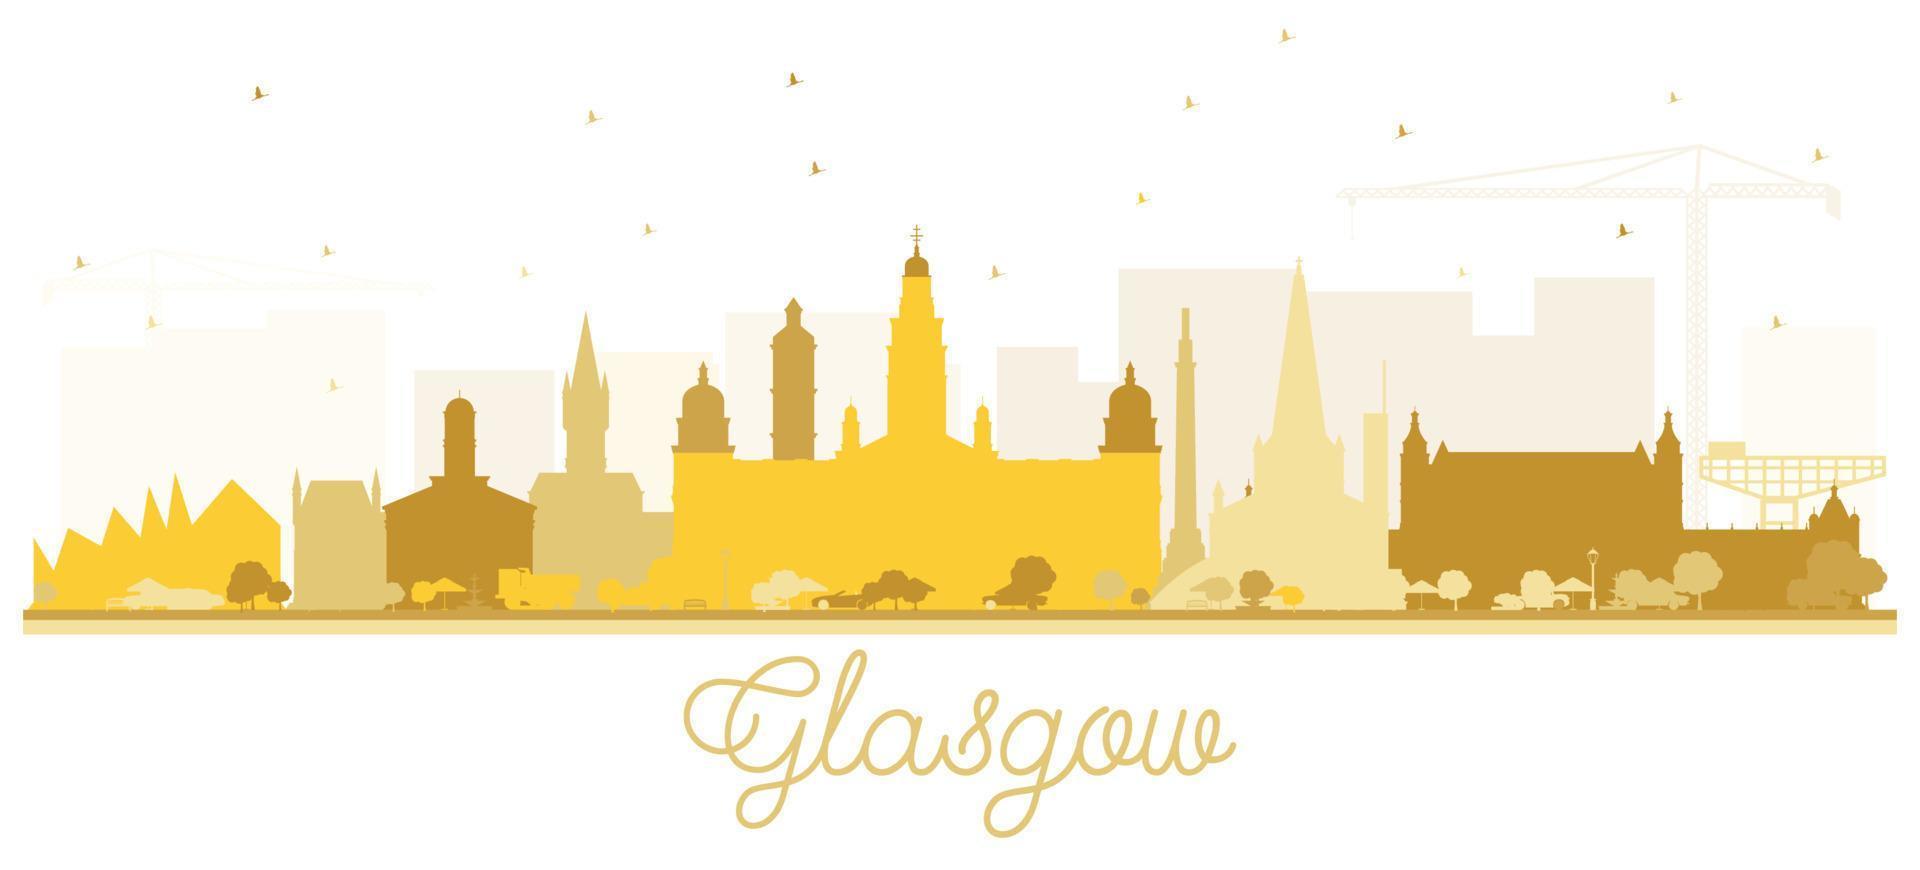 Glasgow Scotland City Skyline with Golden Buildings Isolated on White. vector